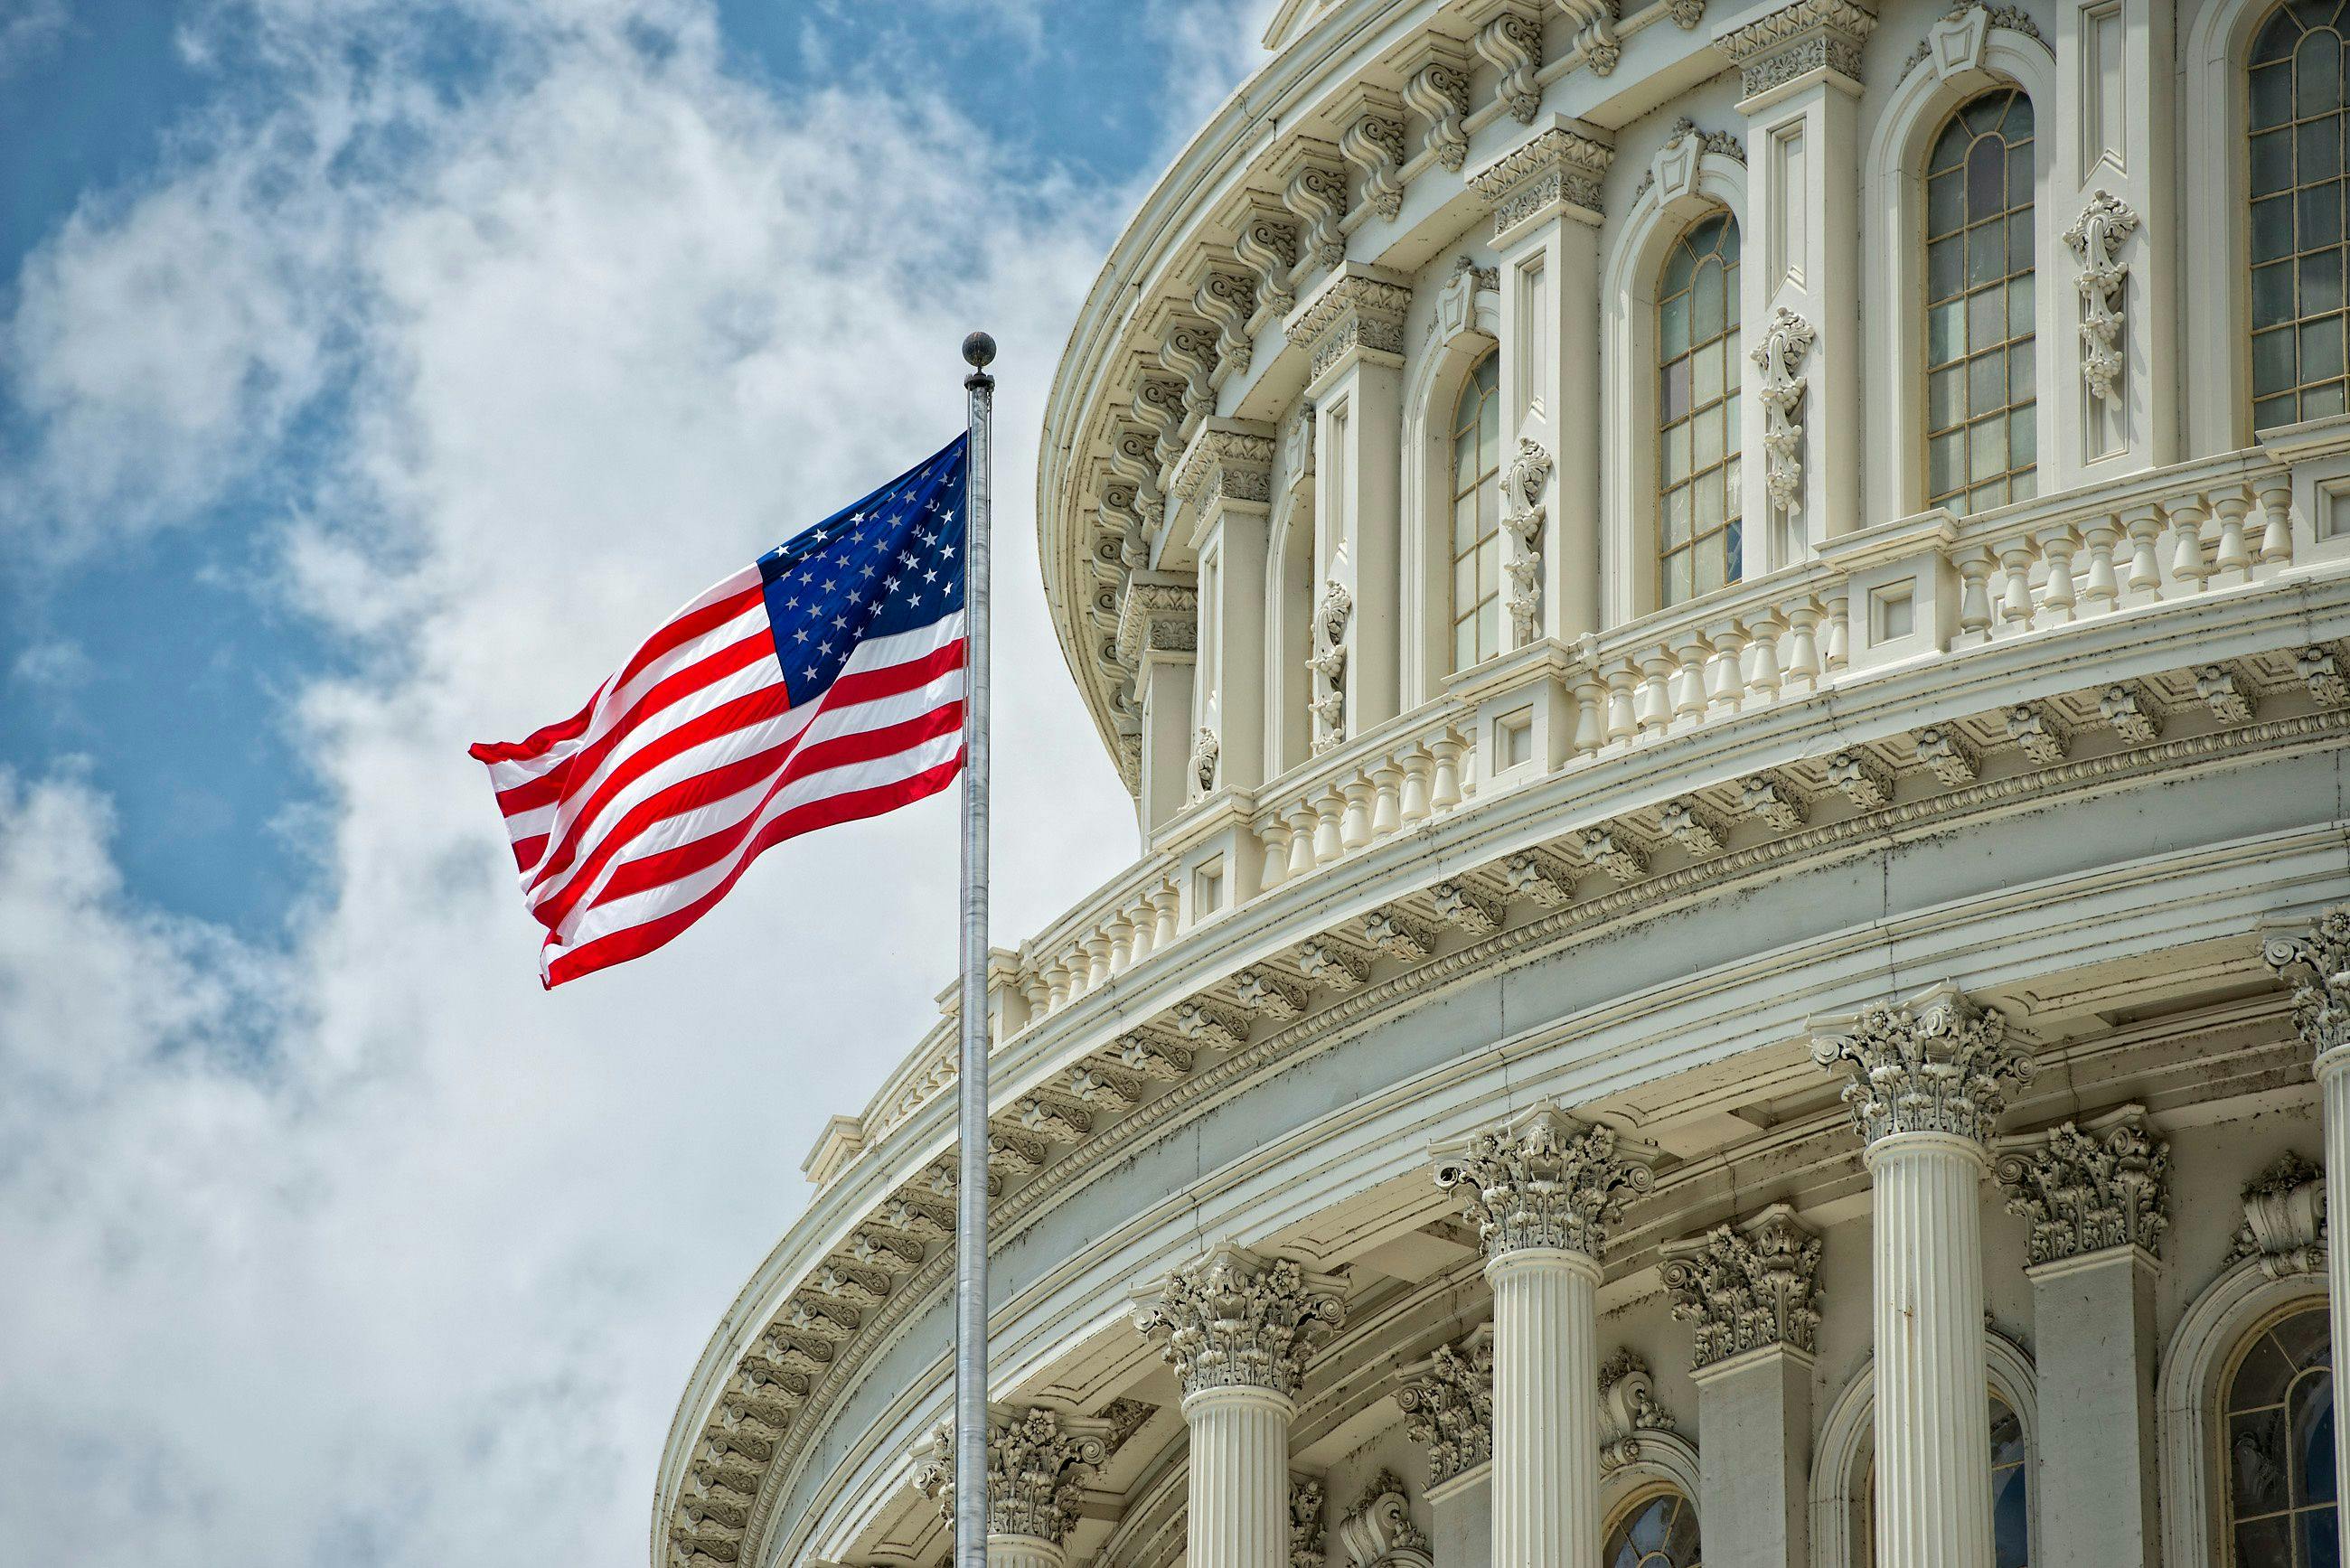 Organizations, including the American Academy of Ophthalmology, urge Congress to take action to address these systemic problems with the Medicare physician payment system by passing legislation providing physicians with an annual inflation-based update tied to the MEI. (Adobe Stock image)